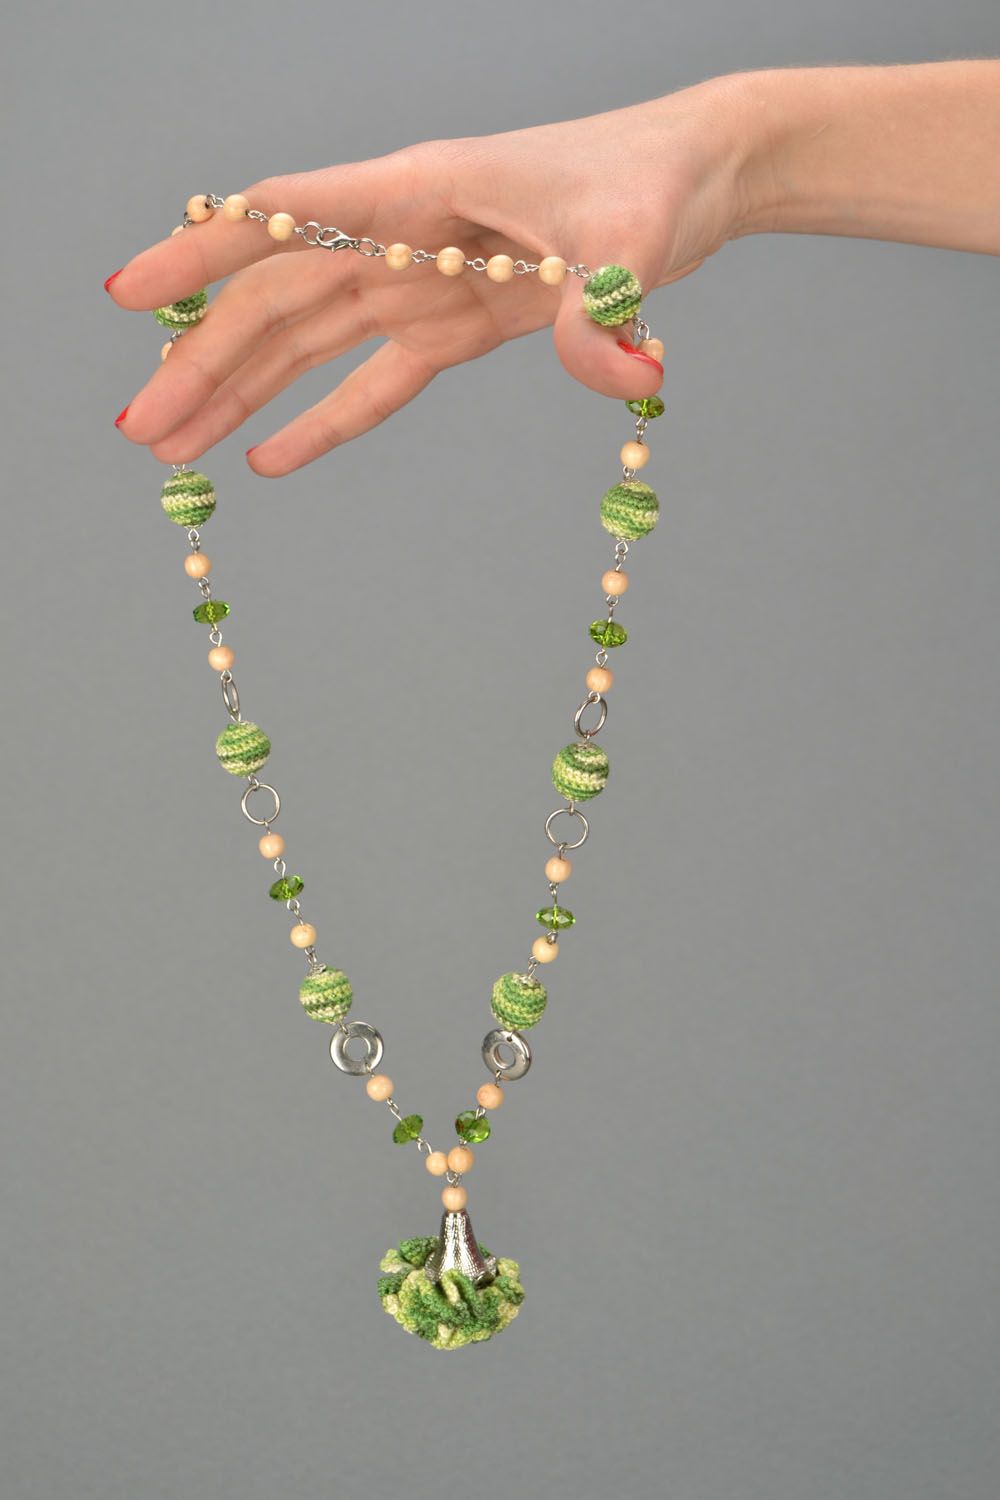 Crocheted beaded necklace photo 2